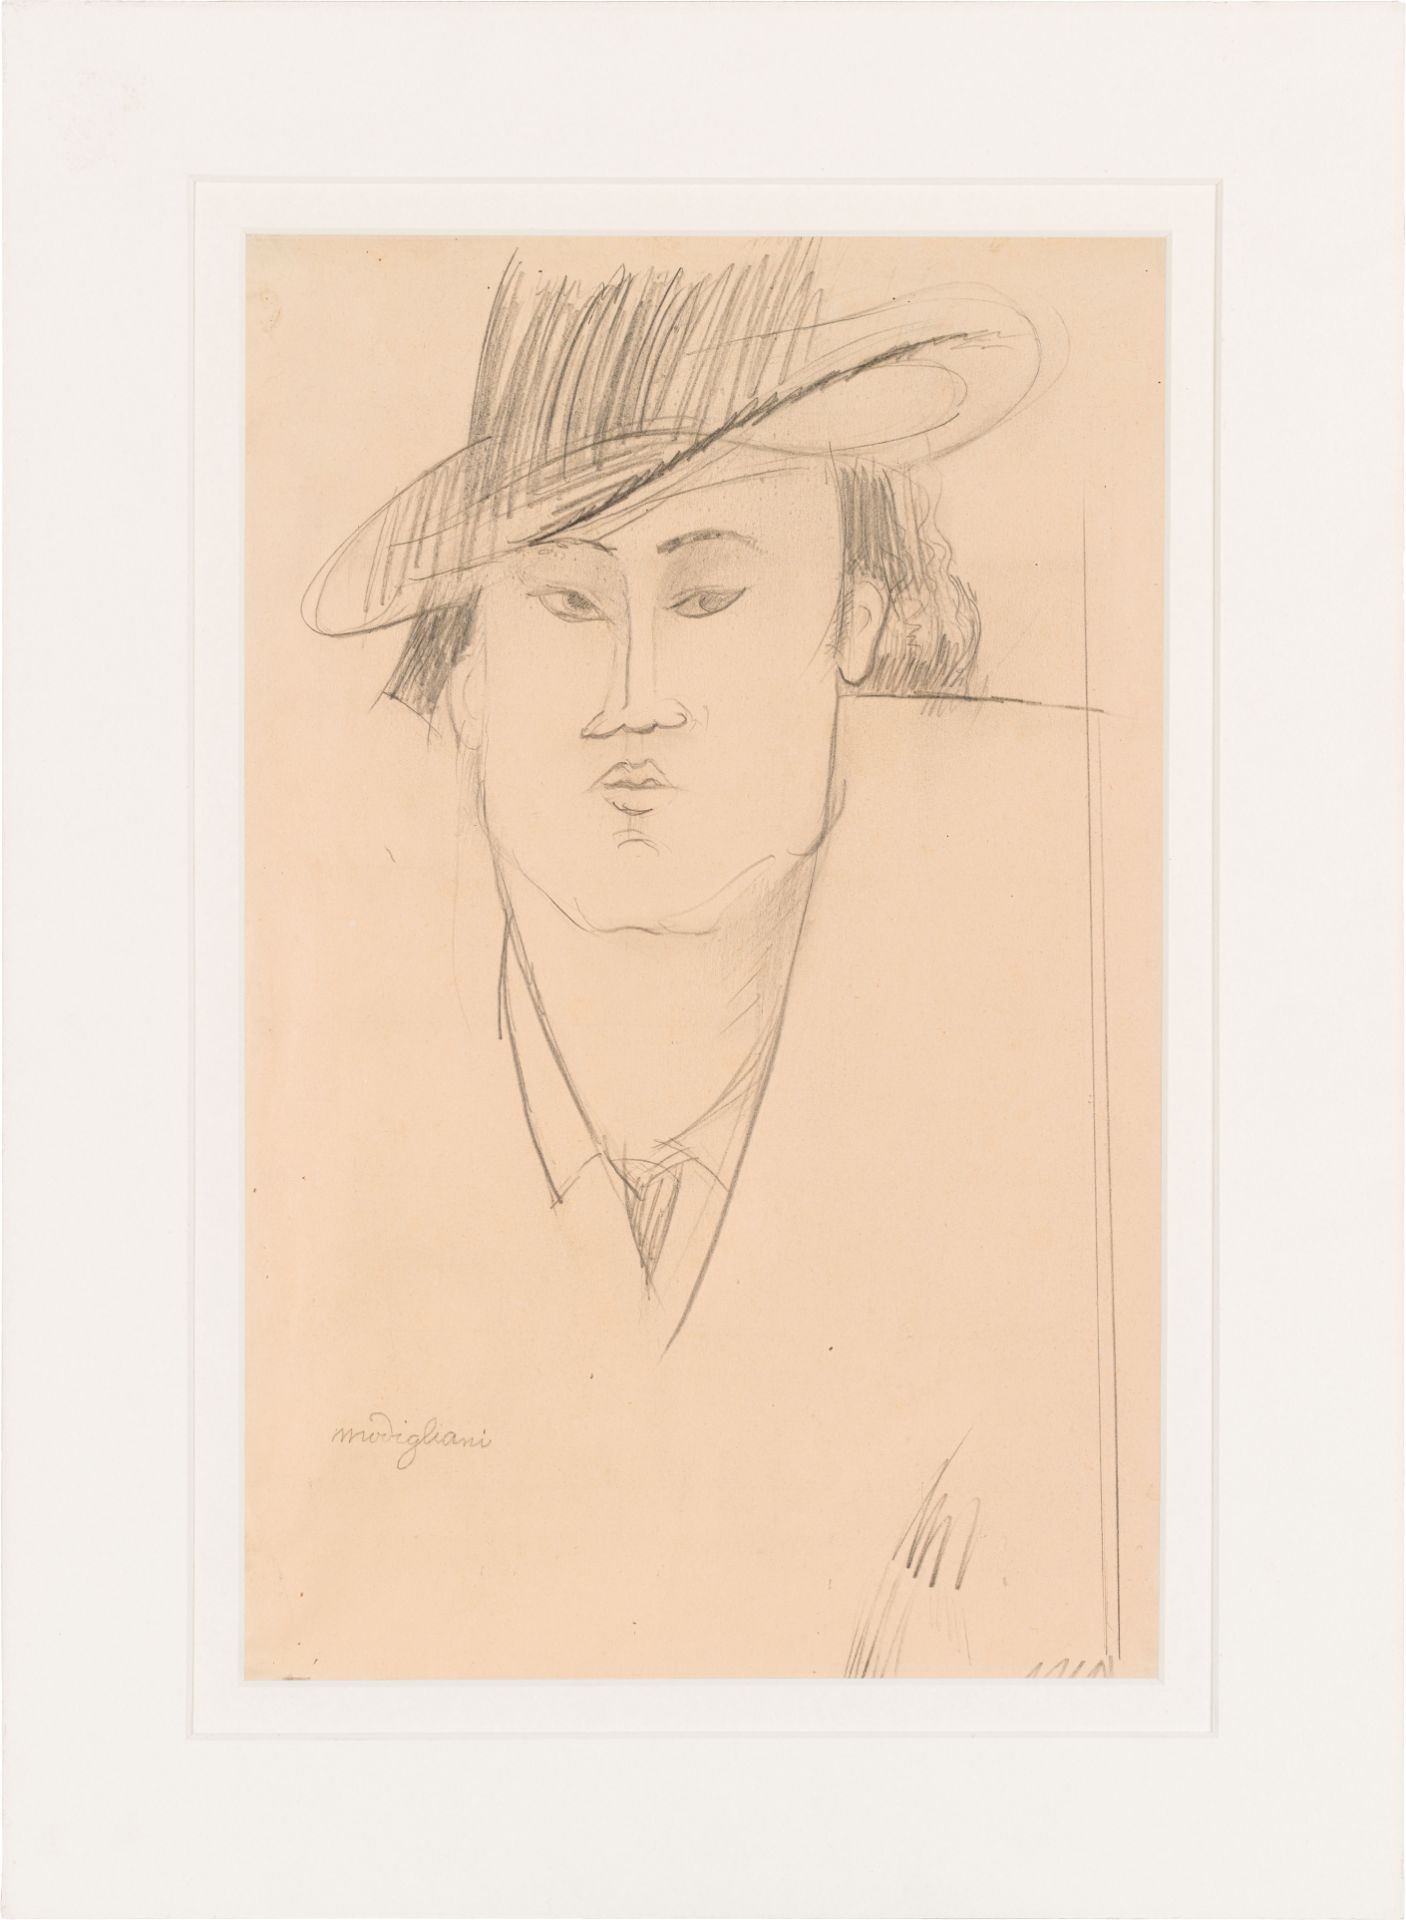  Amedeo Modigliani Attributed to: Portrait of a man - Image 2 of 2